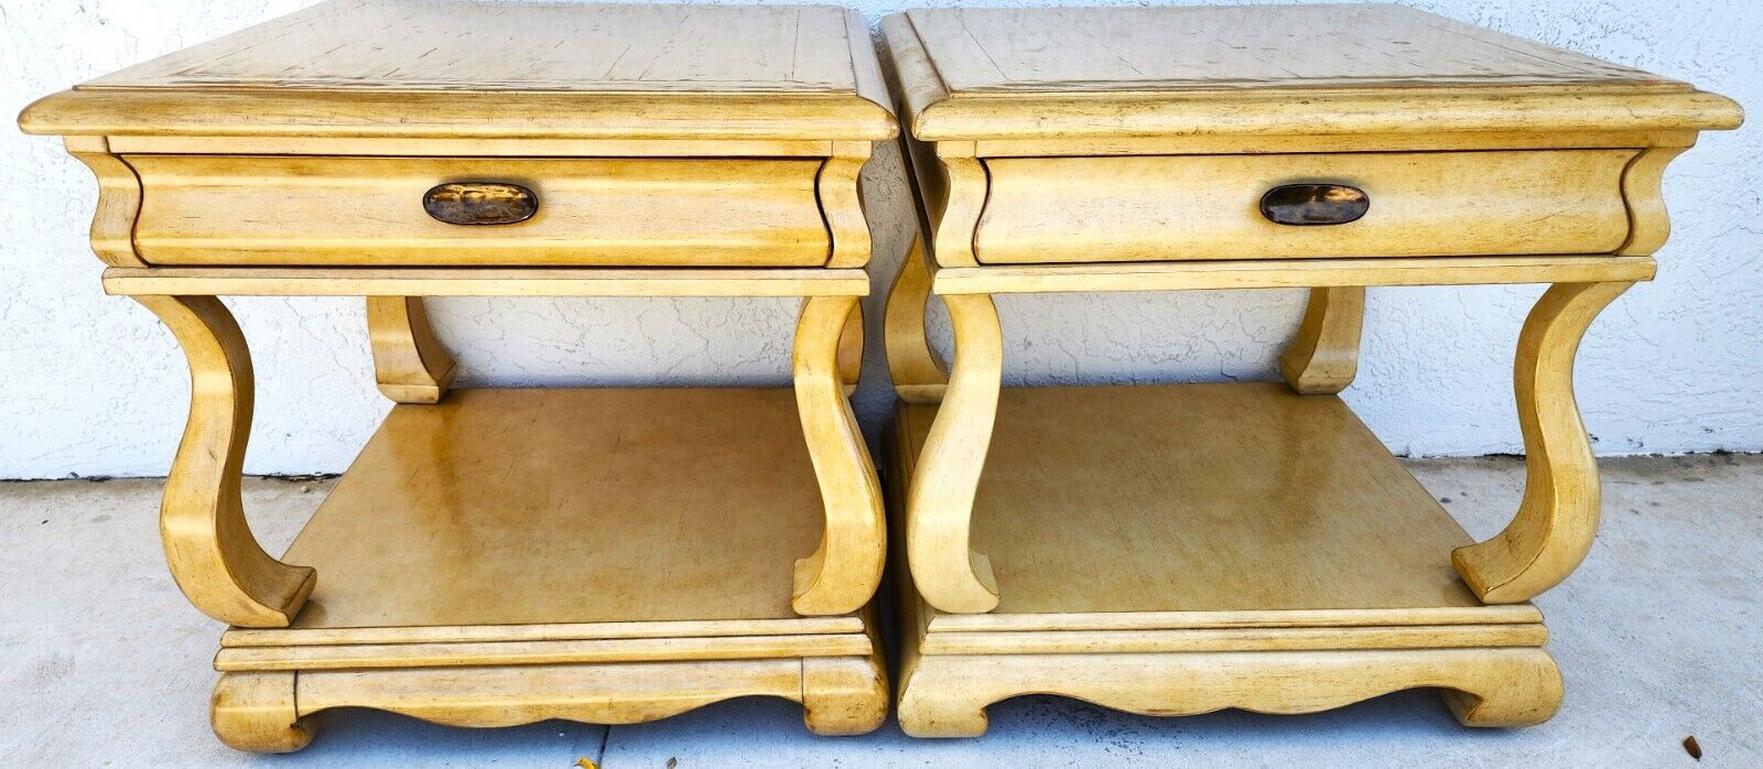 For FULL item description click on CONTINUE READING at the bottom of this page.

Offering One Of Our Recent Palm Beach Estate Fine Furniture Acquisitions Of A 
Pair of Oversized Nightstands Side End Tables Solid Wood by CENTURY